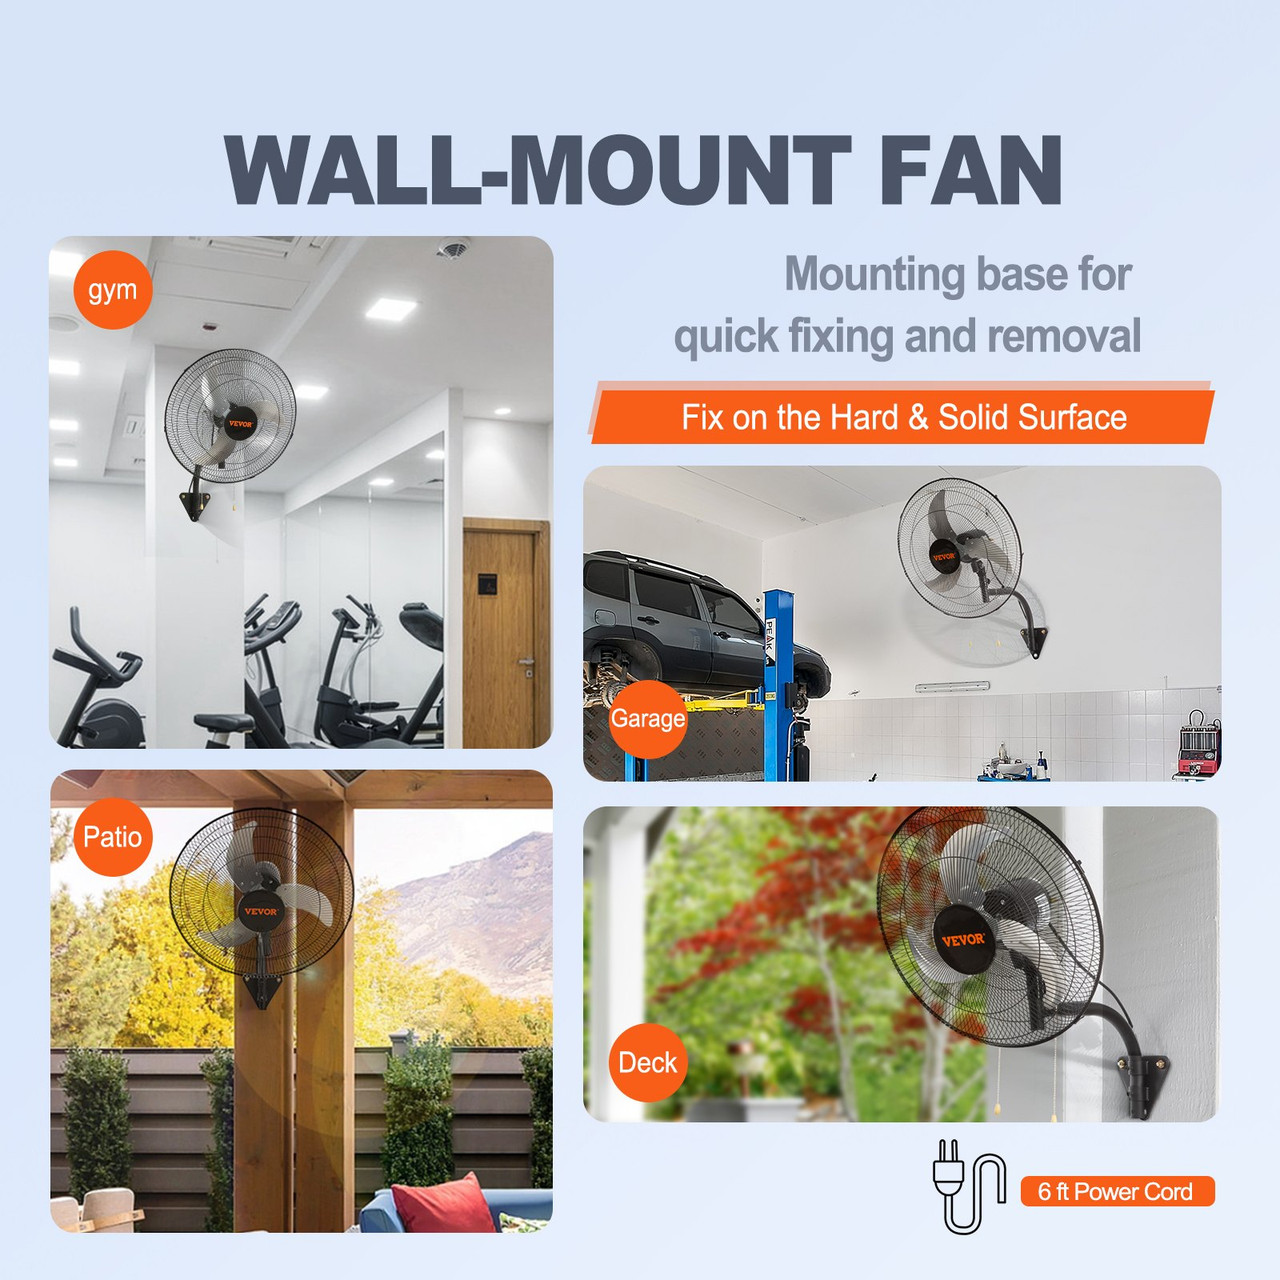 Wall Mount Fan, 18 Inch, 3-speed High Velocity Max. 4000 CFM Oscillating Industrial Wall Fan, Commercial or Residential for Warehouse, Greenhouse, Workshop, Patio, Basement, Black, ETL Listed